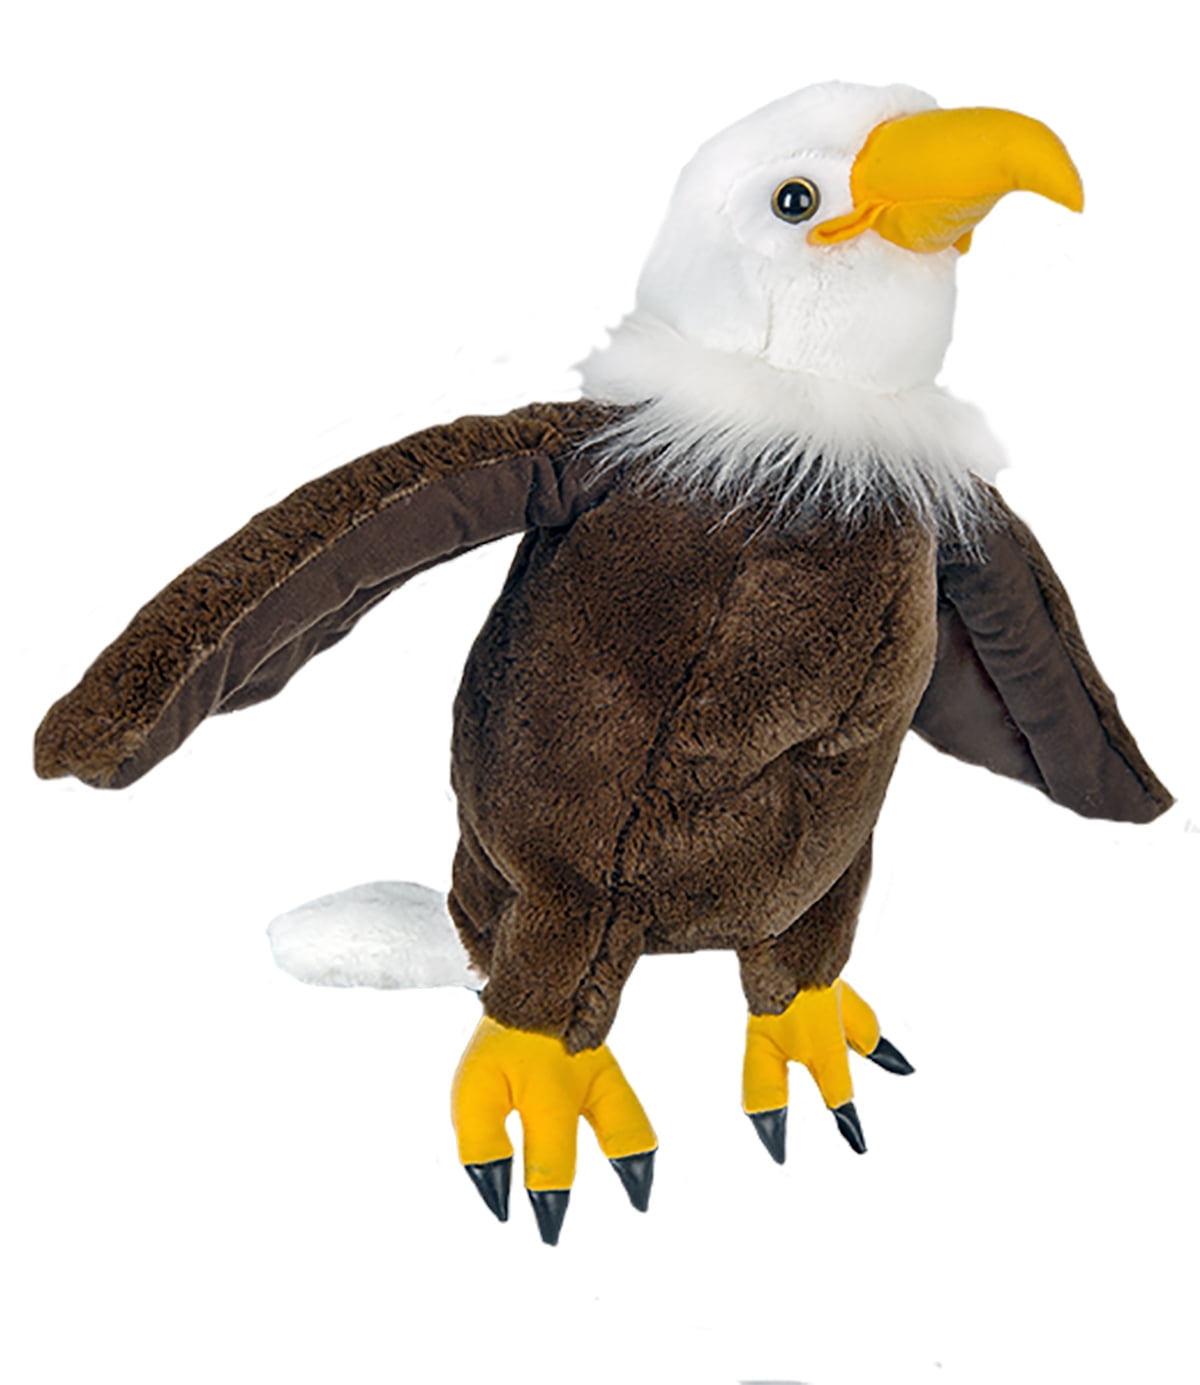 8 Inch Colbert Eagle Plush Stuffed Animal by Douglas for sale online 